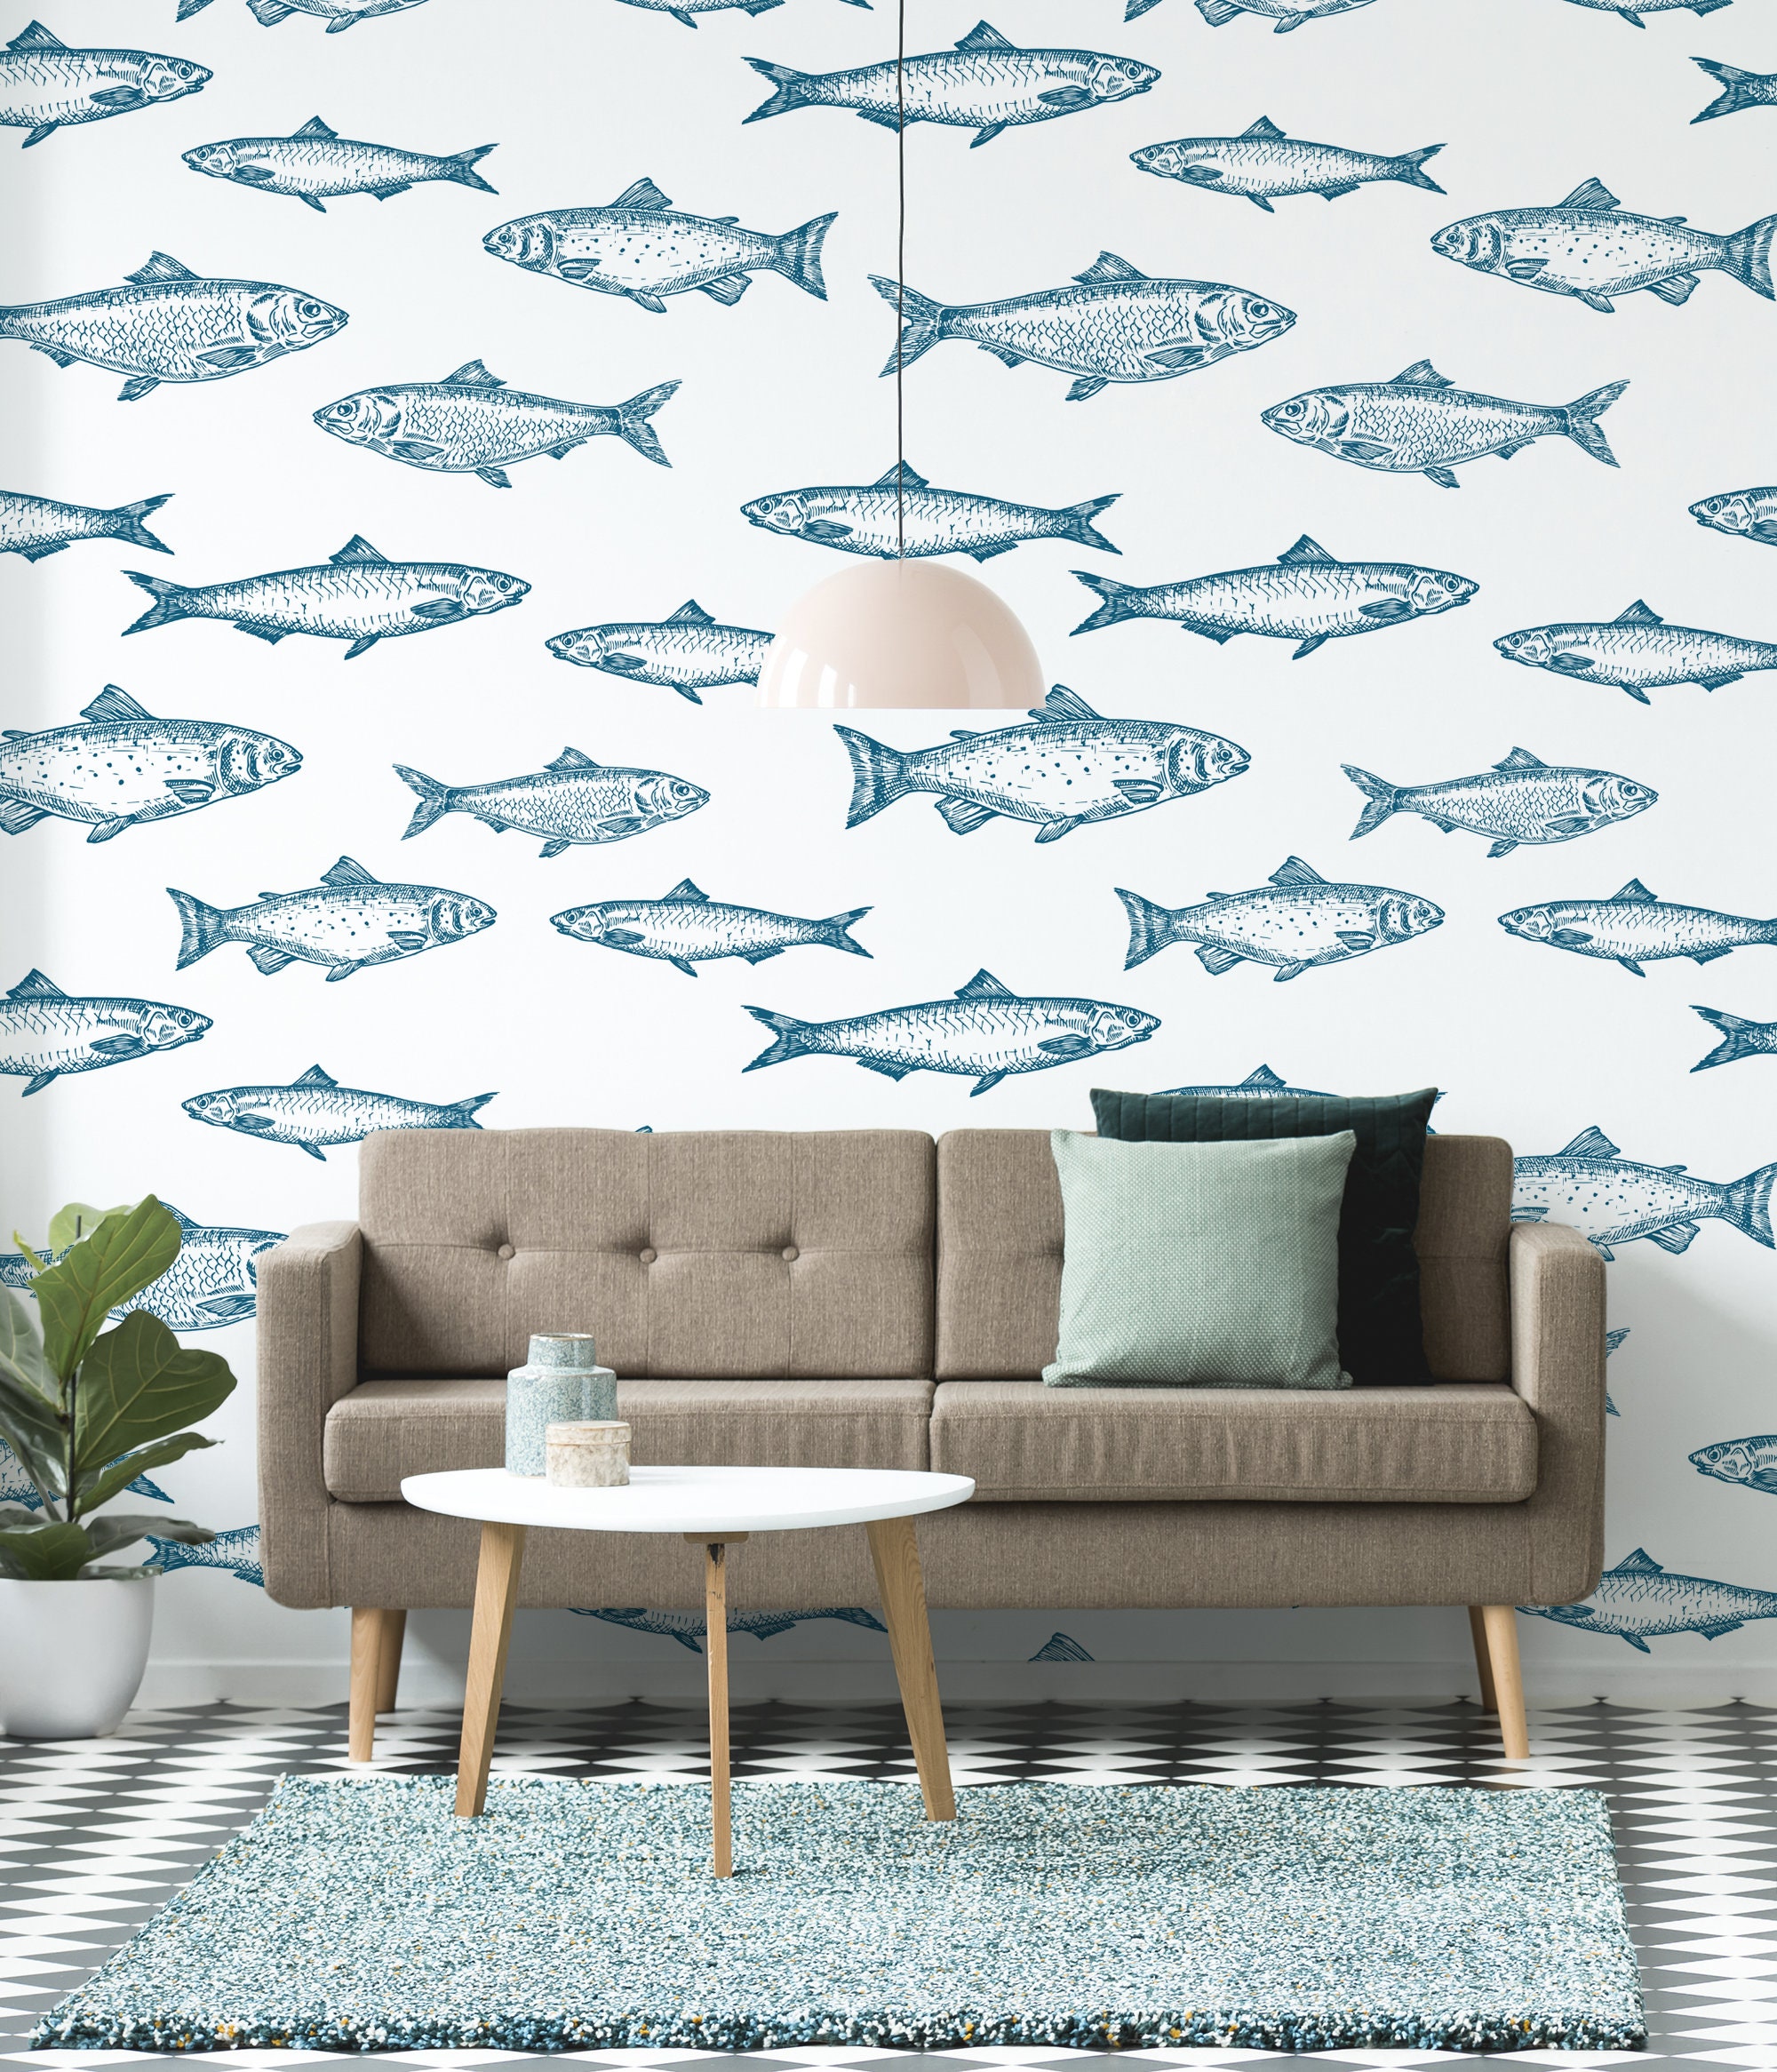 Removable Wallpaper 12ft x 2ft  Black Fish Cream Blowfish Masculine Room  Abstract Minimalist Custom Prepasted Wallpaper by Spoonflower  Walmartcom